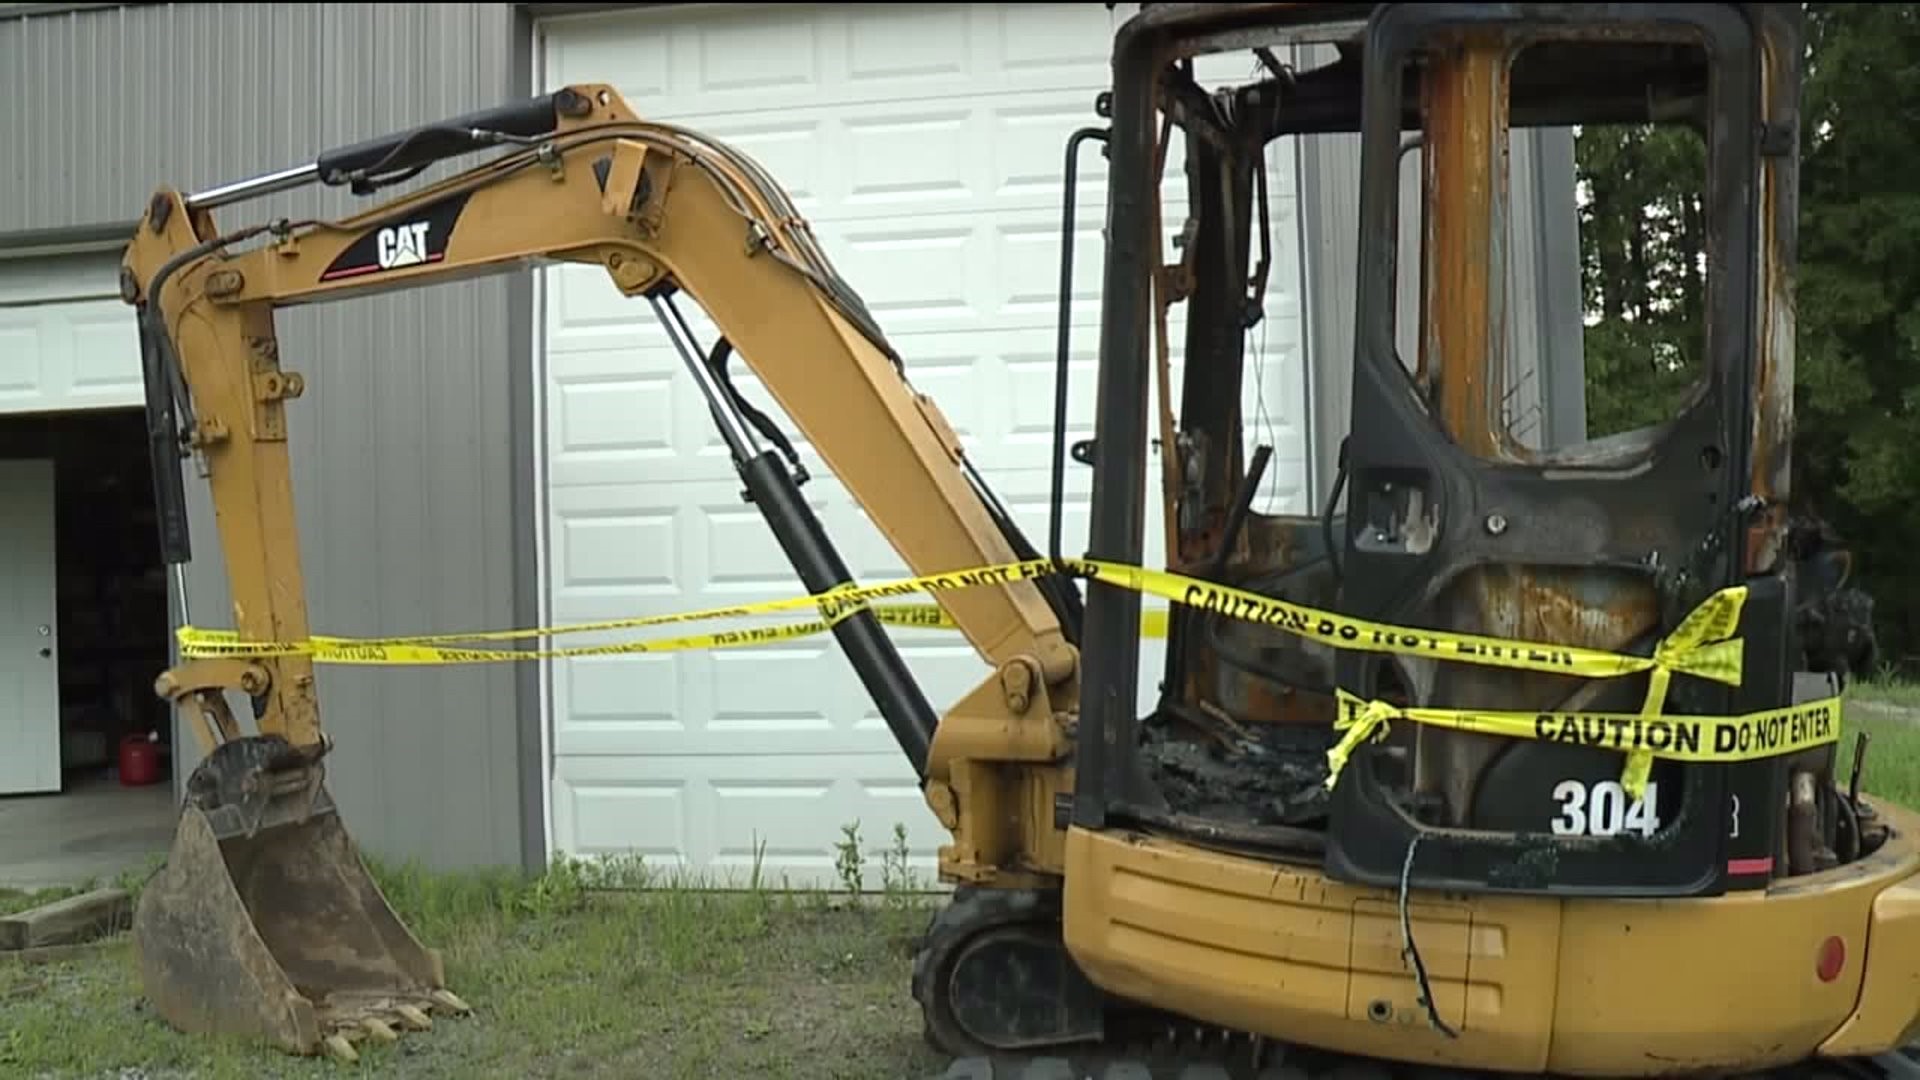 Excavator Set on Fire at Cemetery in Lackawanna County